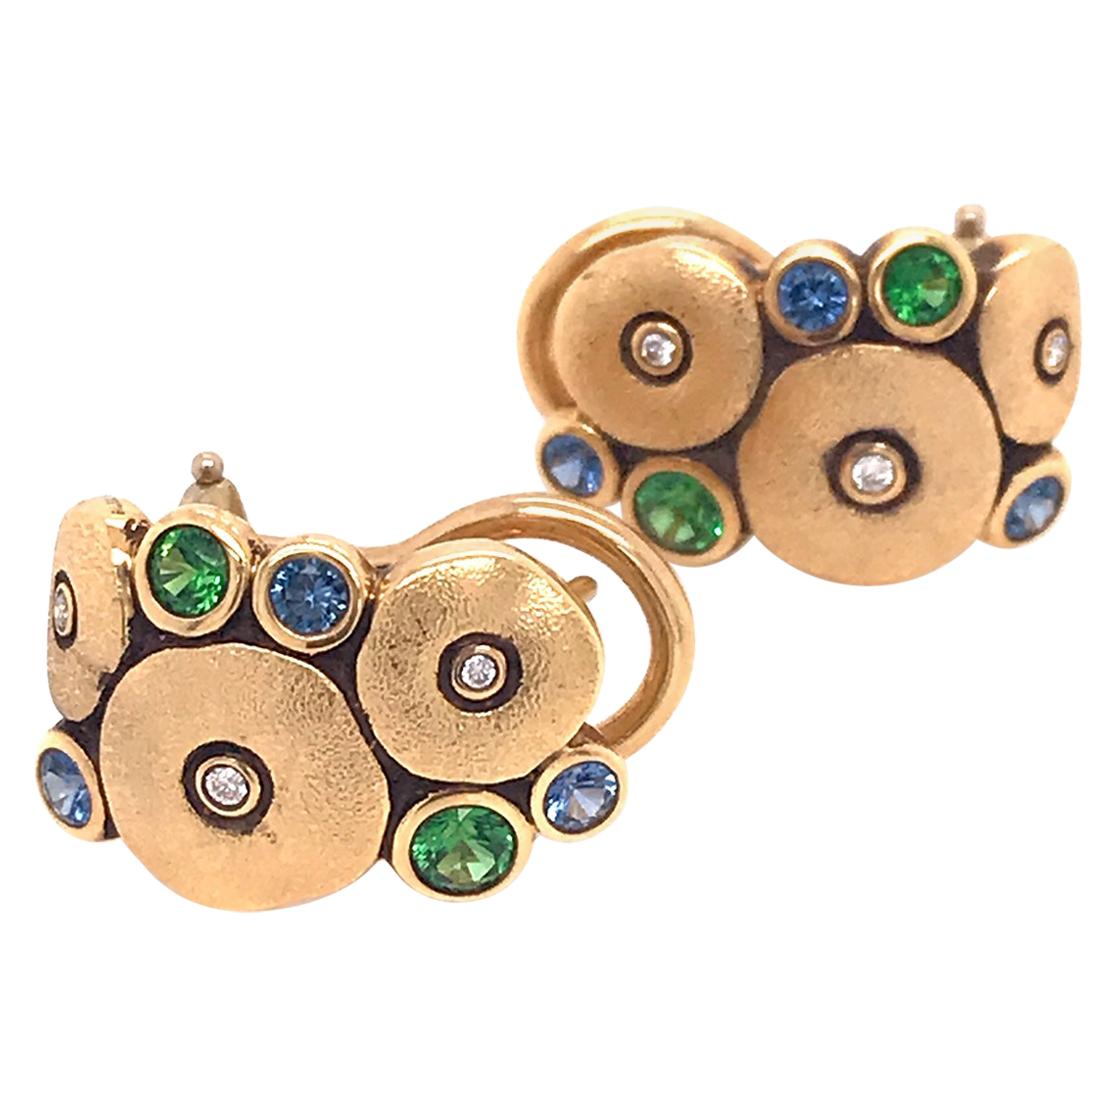 Alex Sepkus "Orchard" Earrings with Blue Sapphires and Green Tsavorites in Gold For Sale